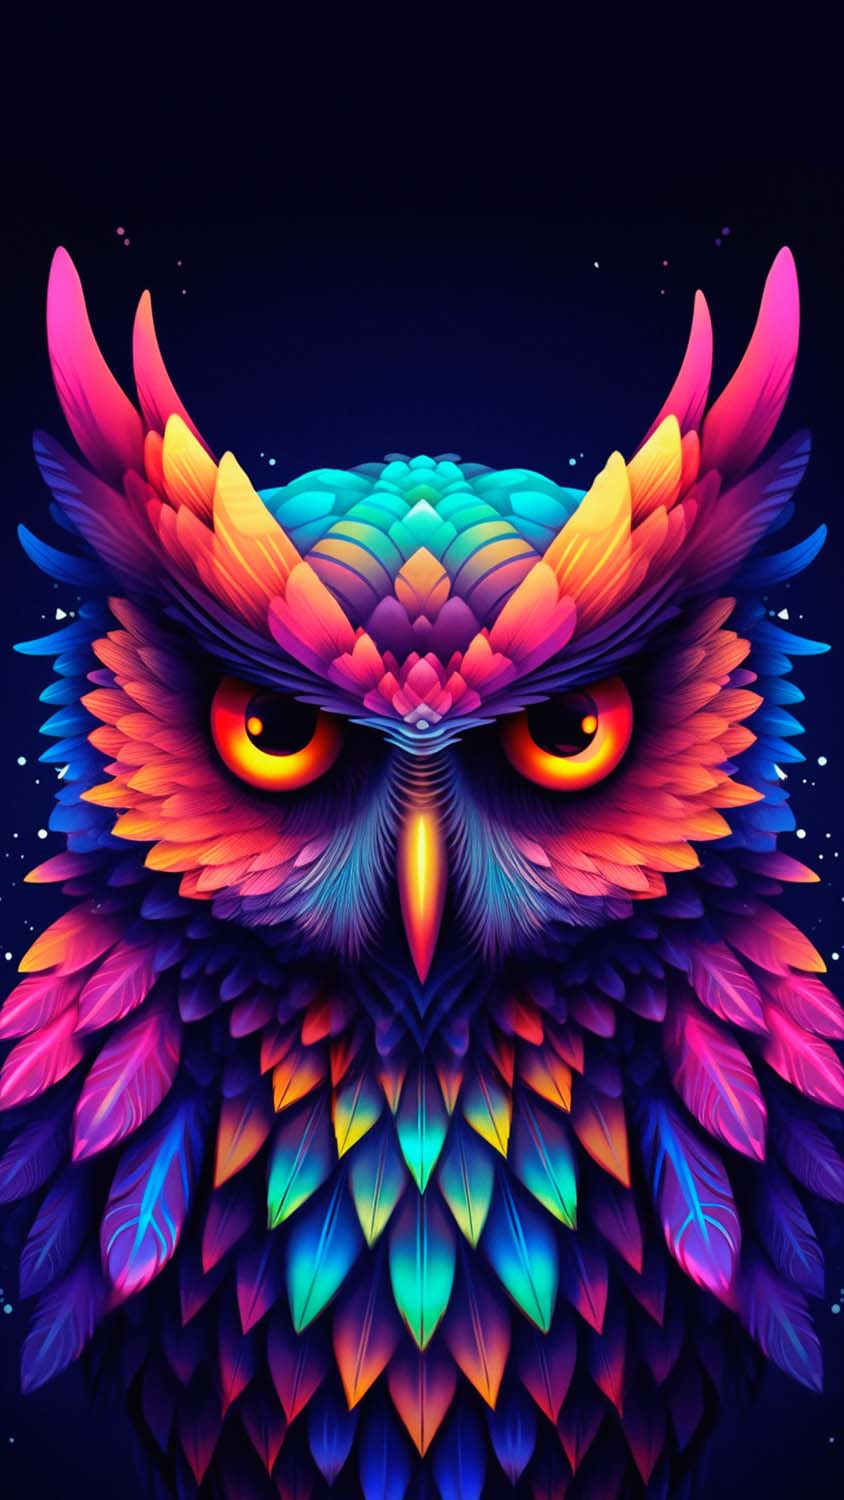 Tribal Owl wallpaper by ShadowHawk75  Download on ZEDGE  2b25